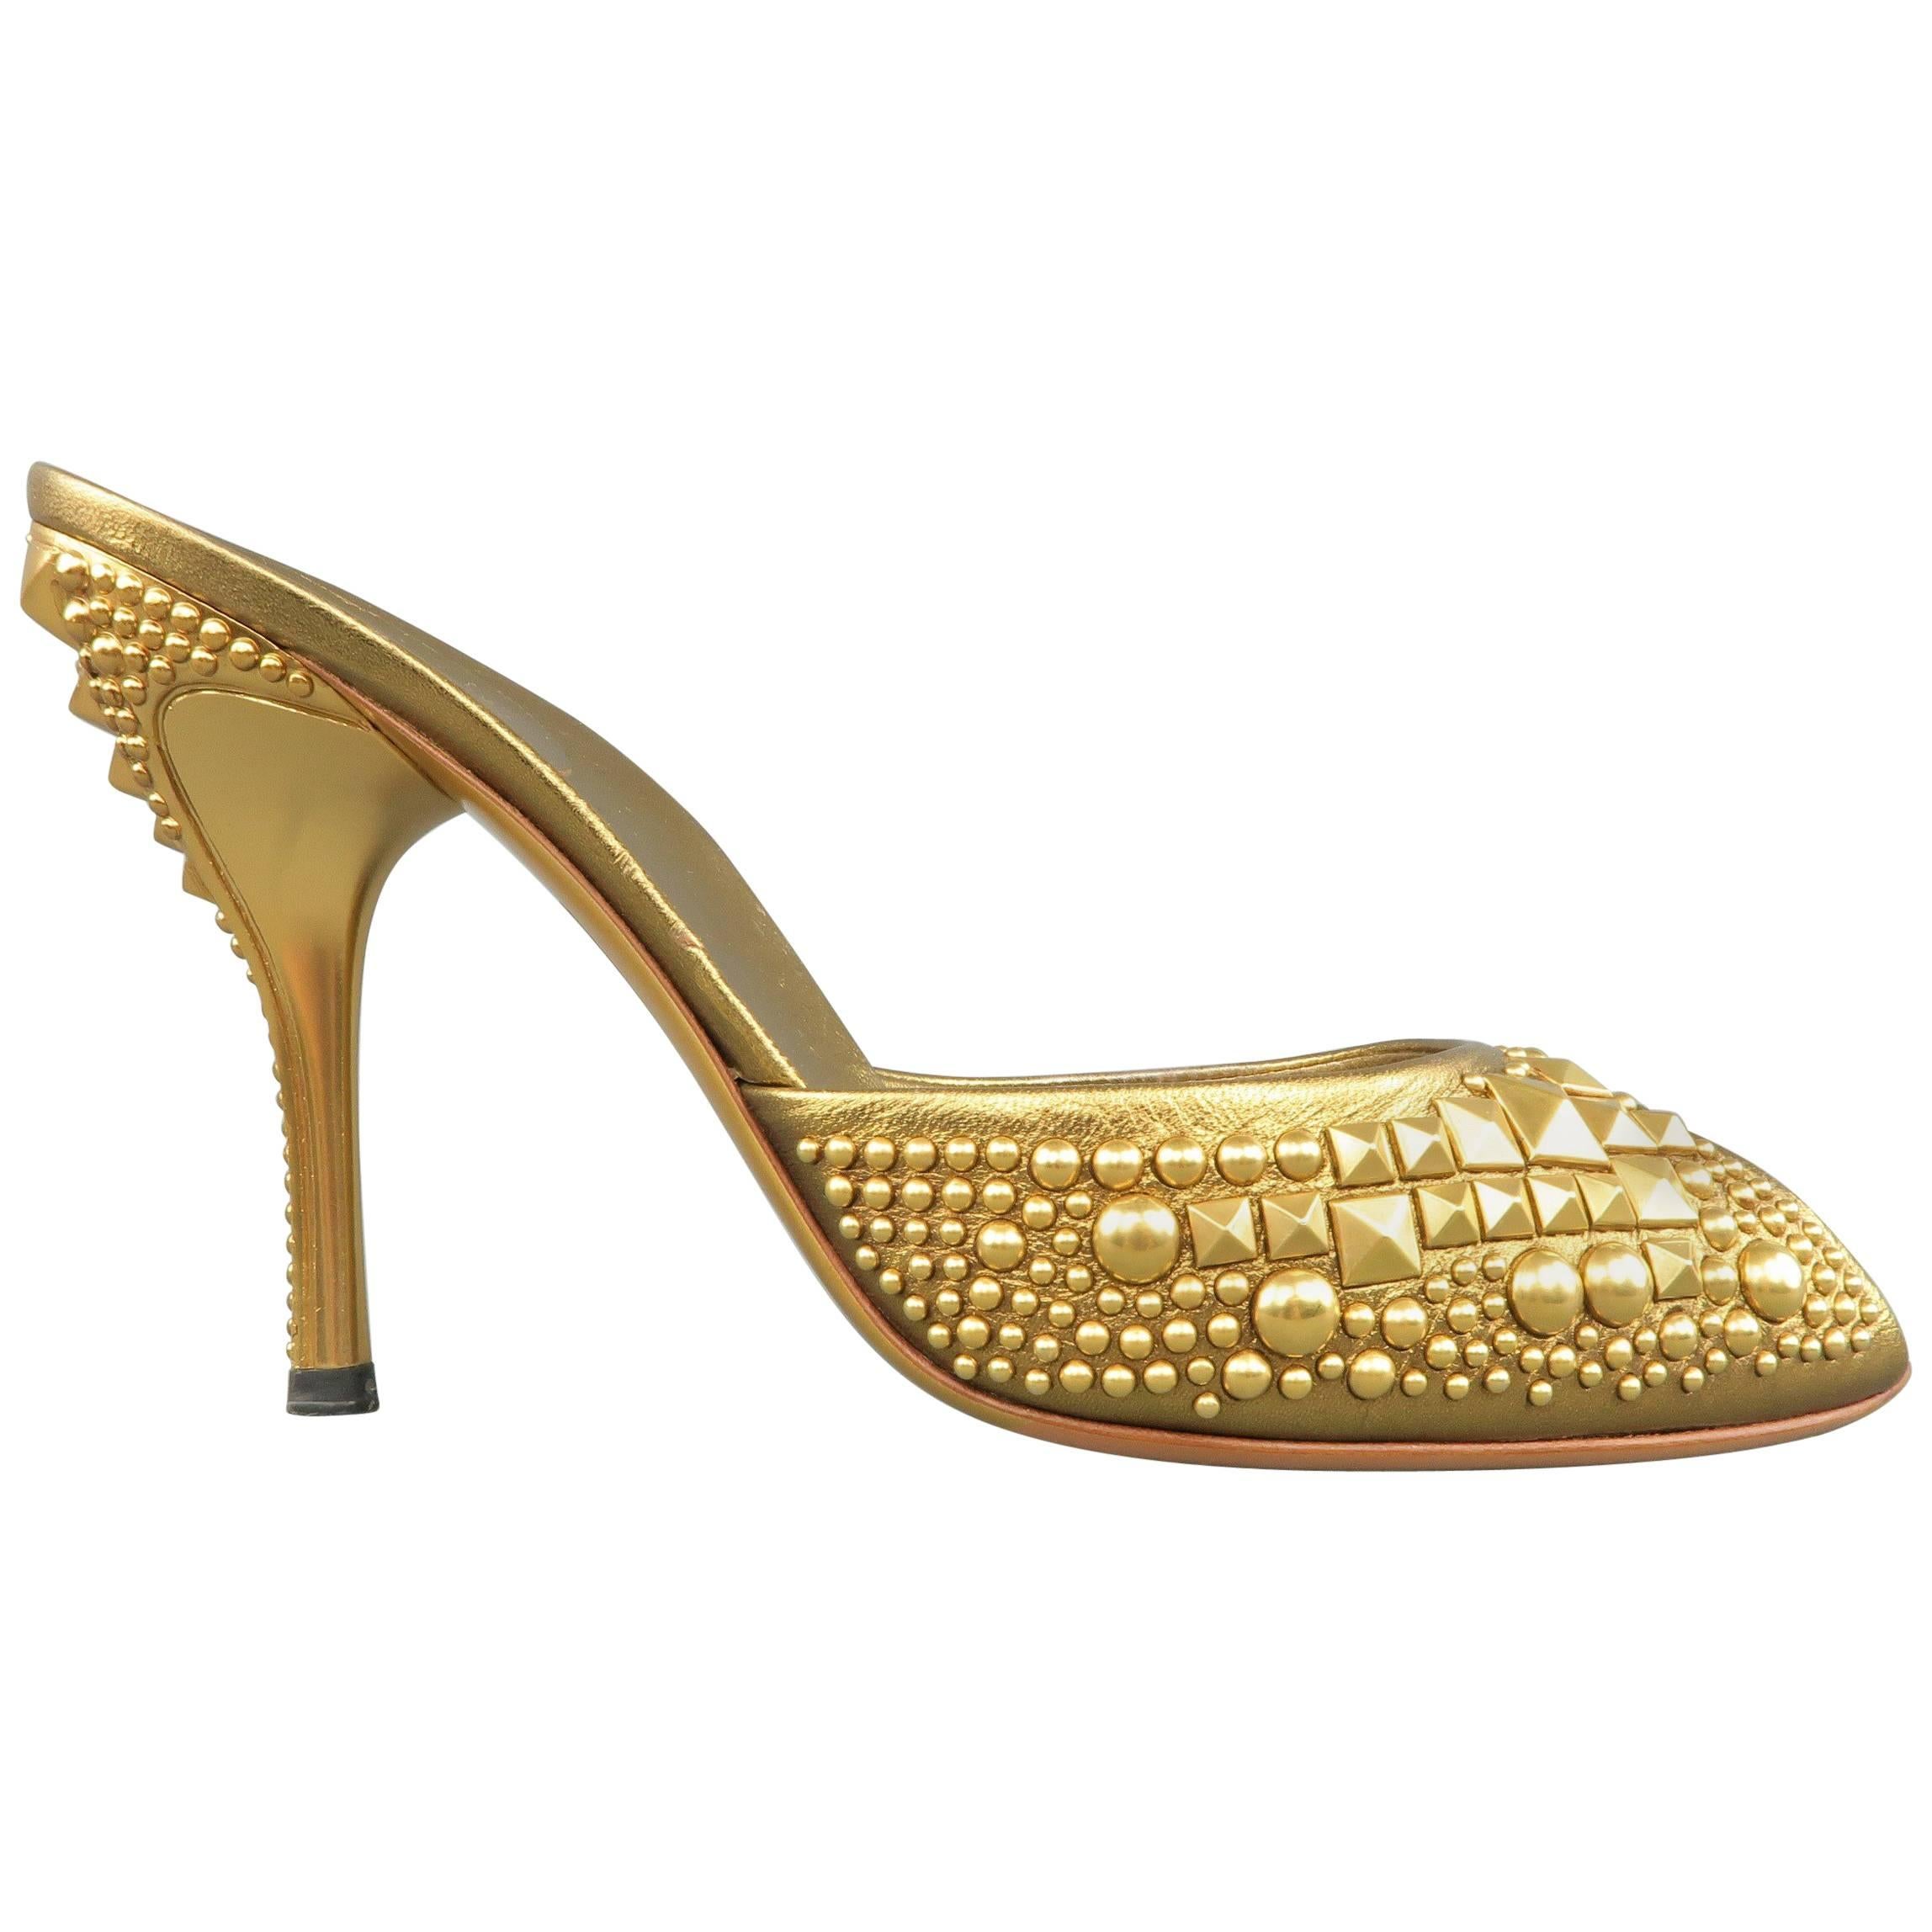 GUCCI Size 9.5 Gold Pyramid Studded Leather Peep Toe Mule